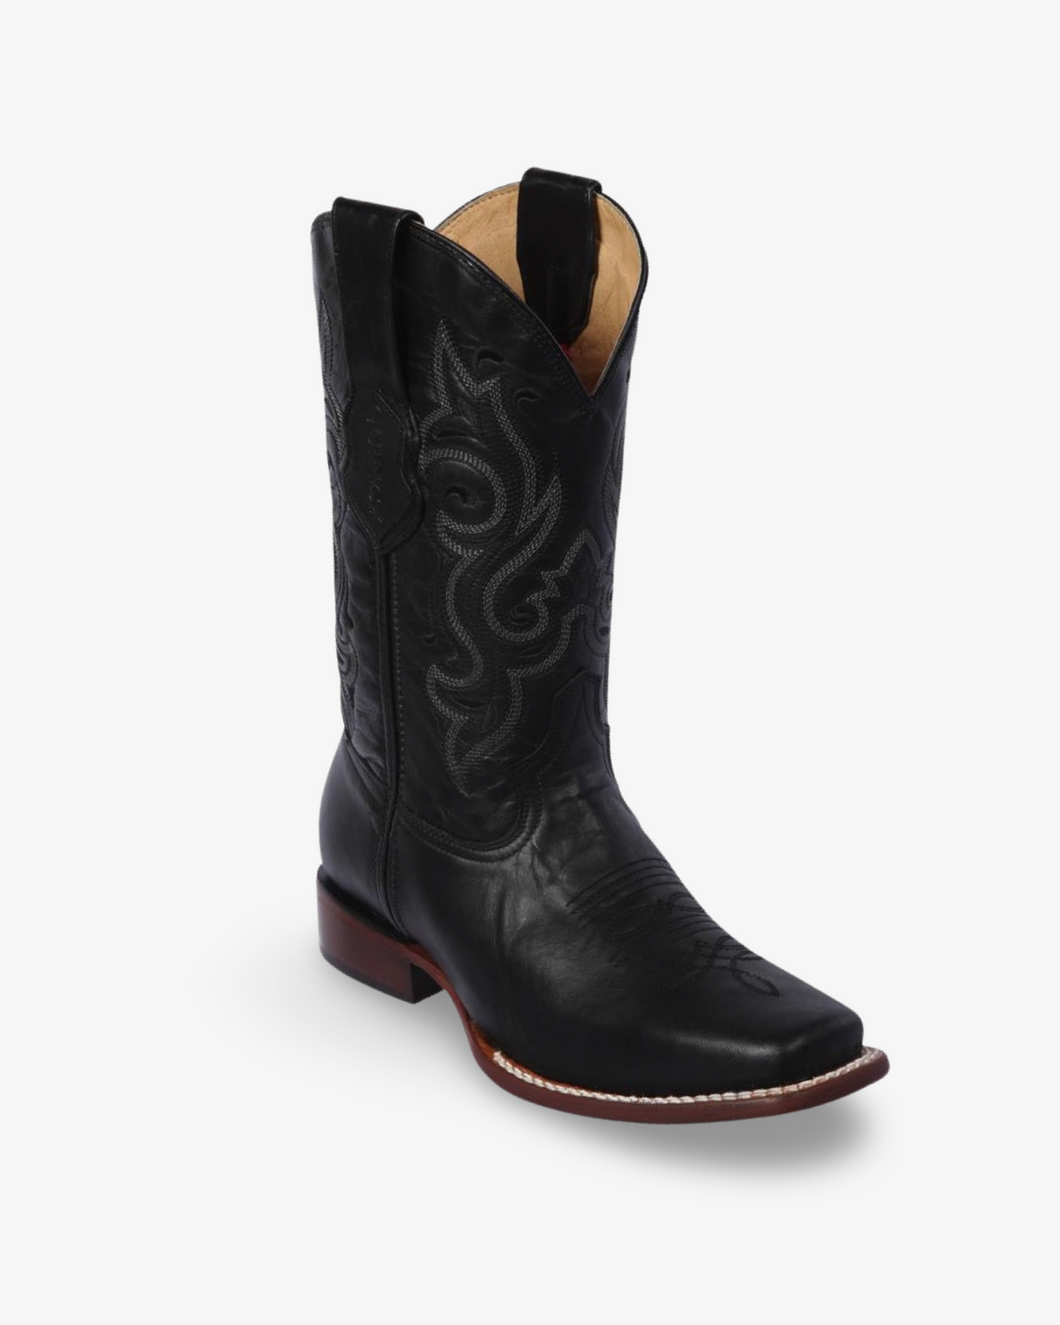 Quincy Boots Black Leather Square Toe Cowboy Boot